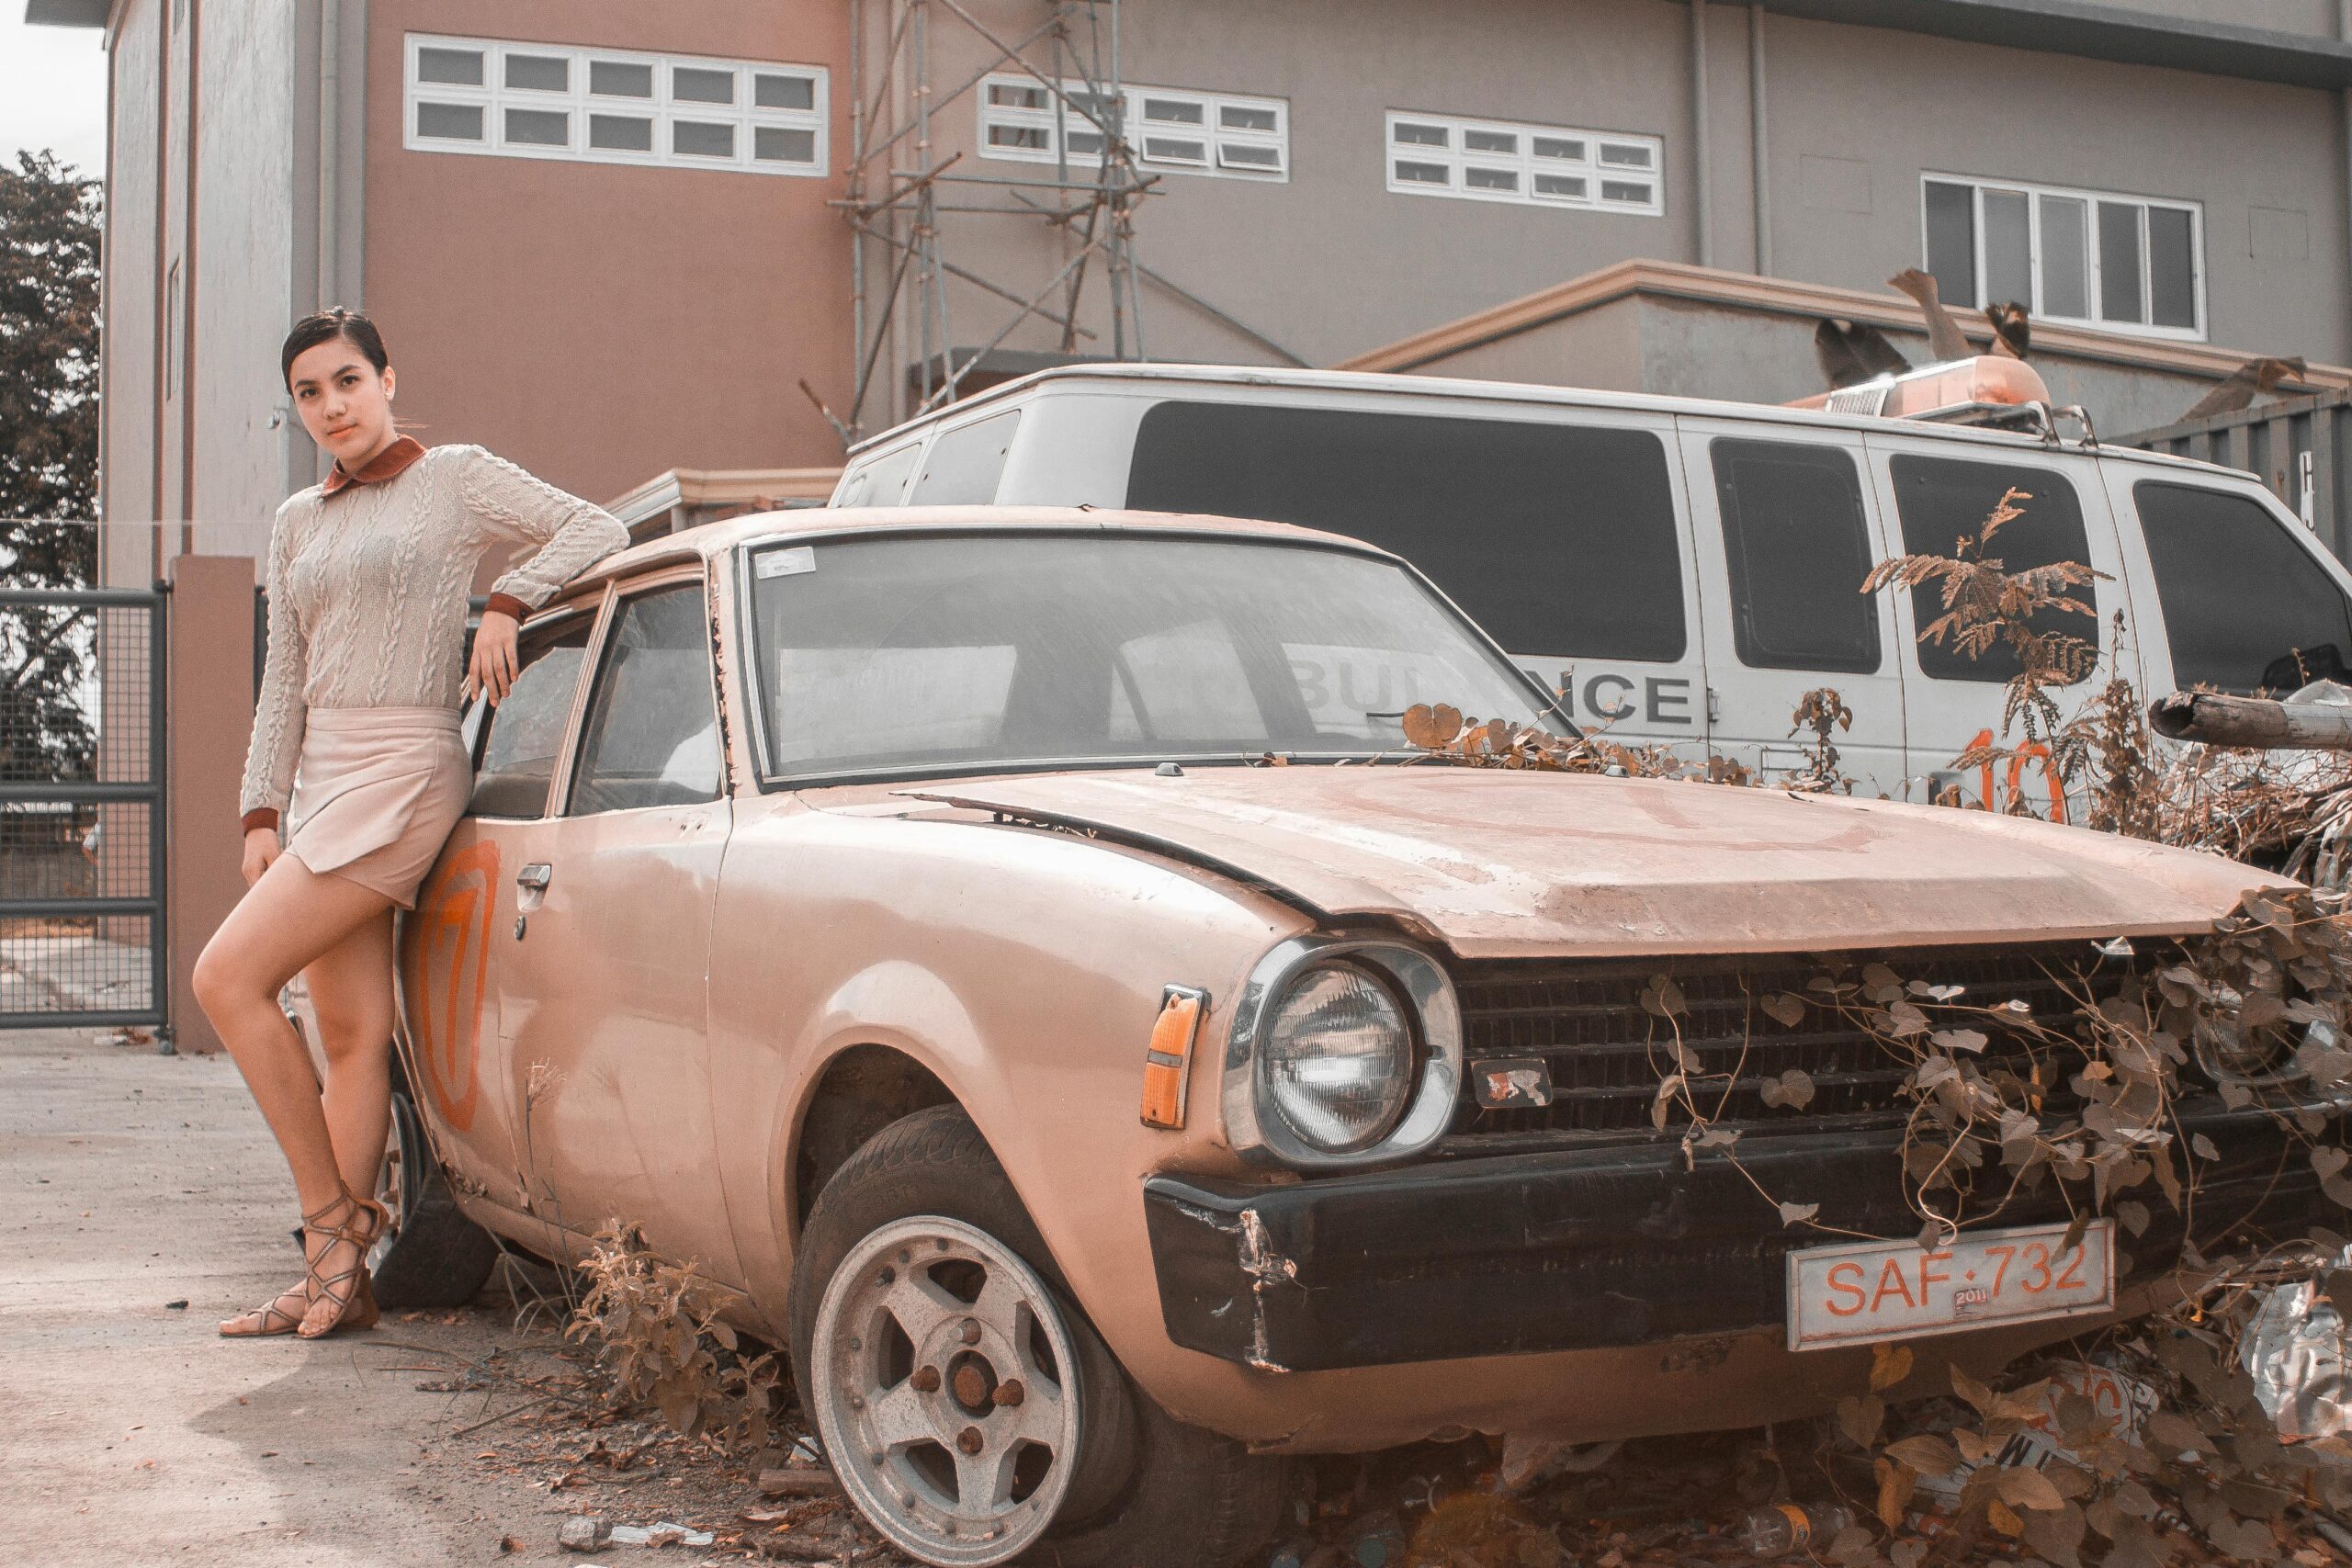 What Are the Benefits of Selling Car to a junkyard